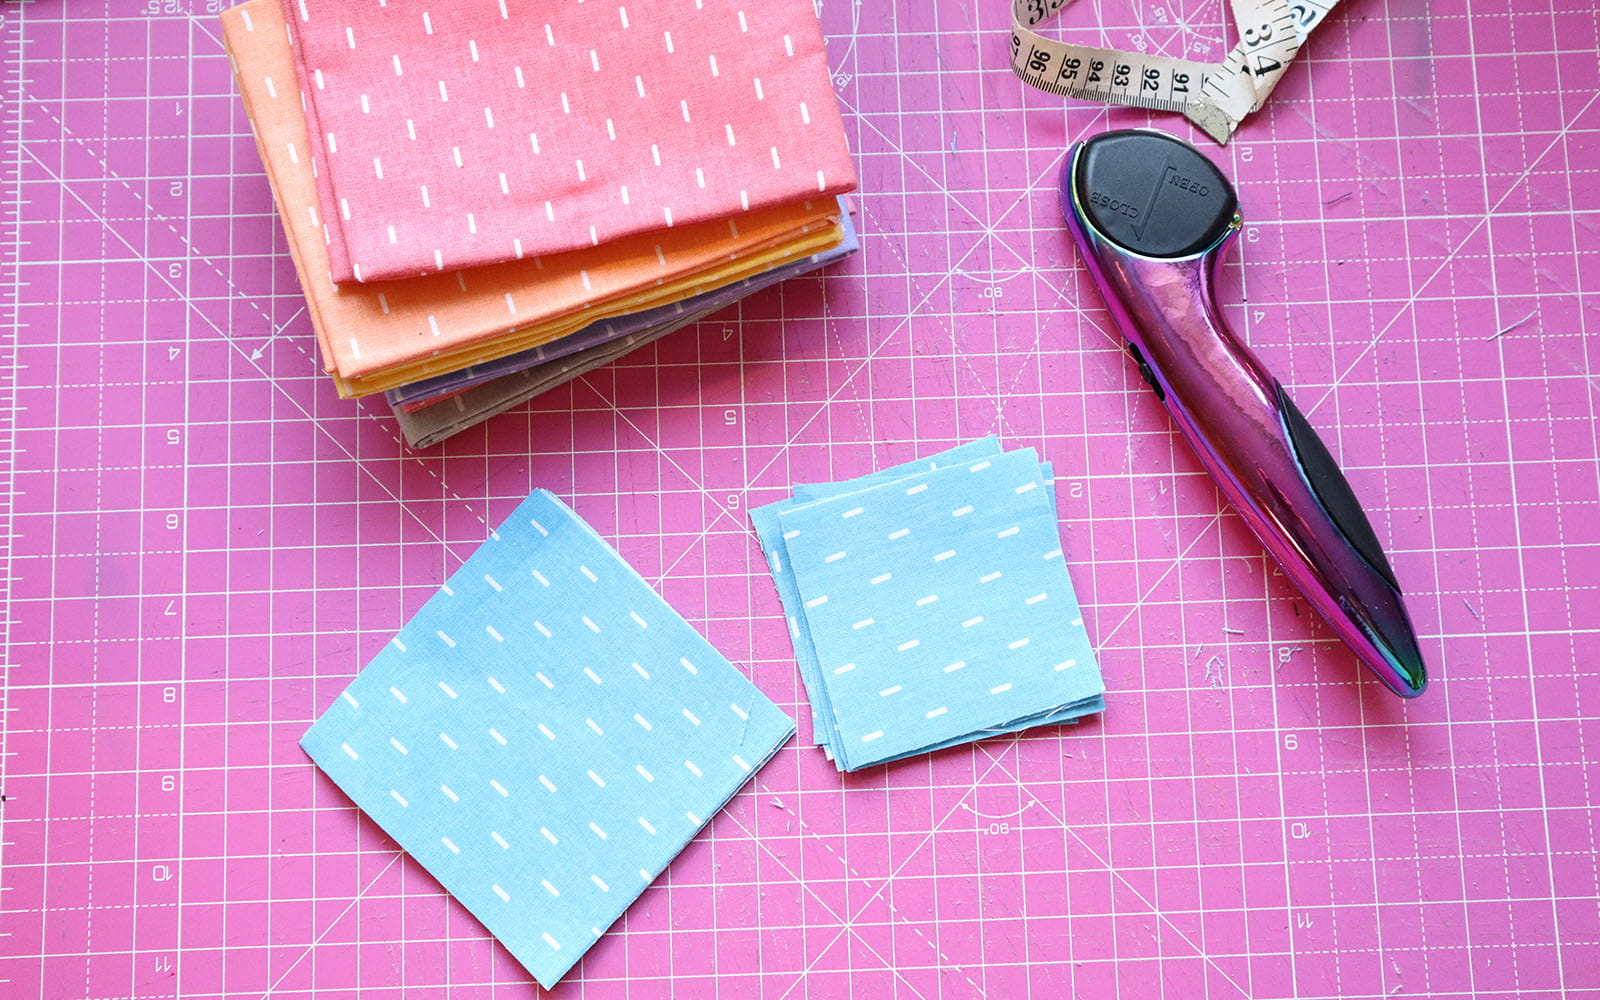 Blue fabric squares in 2 sizes on pink cutting mat